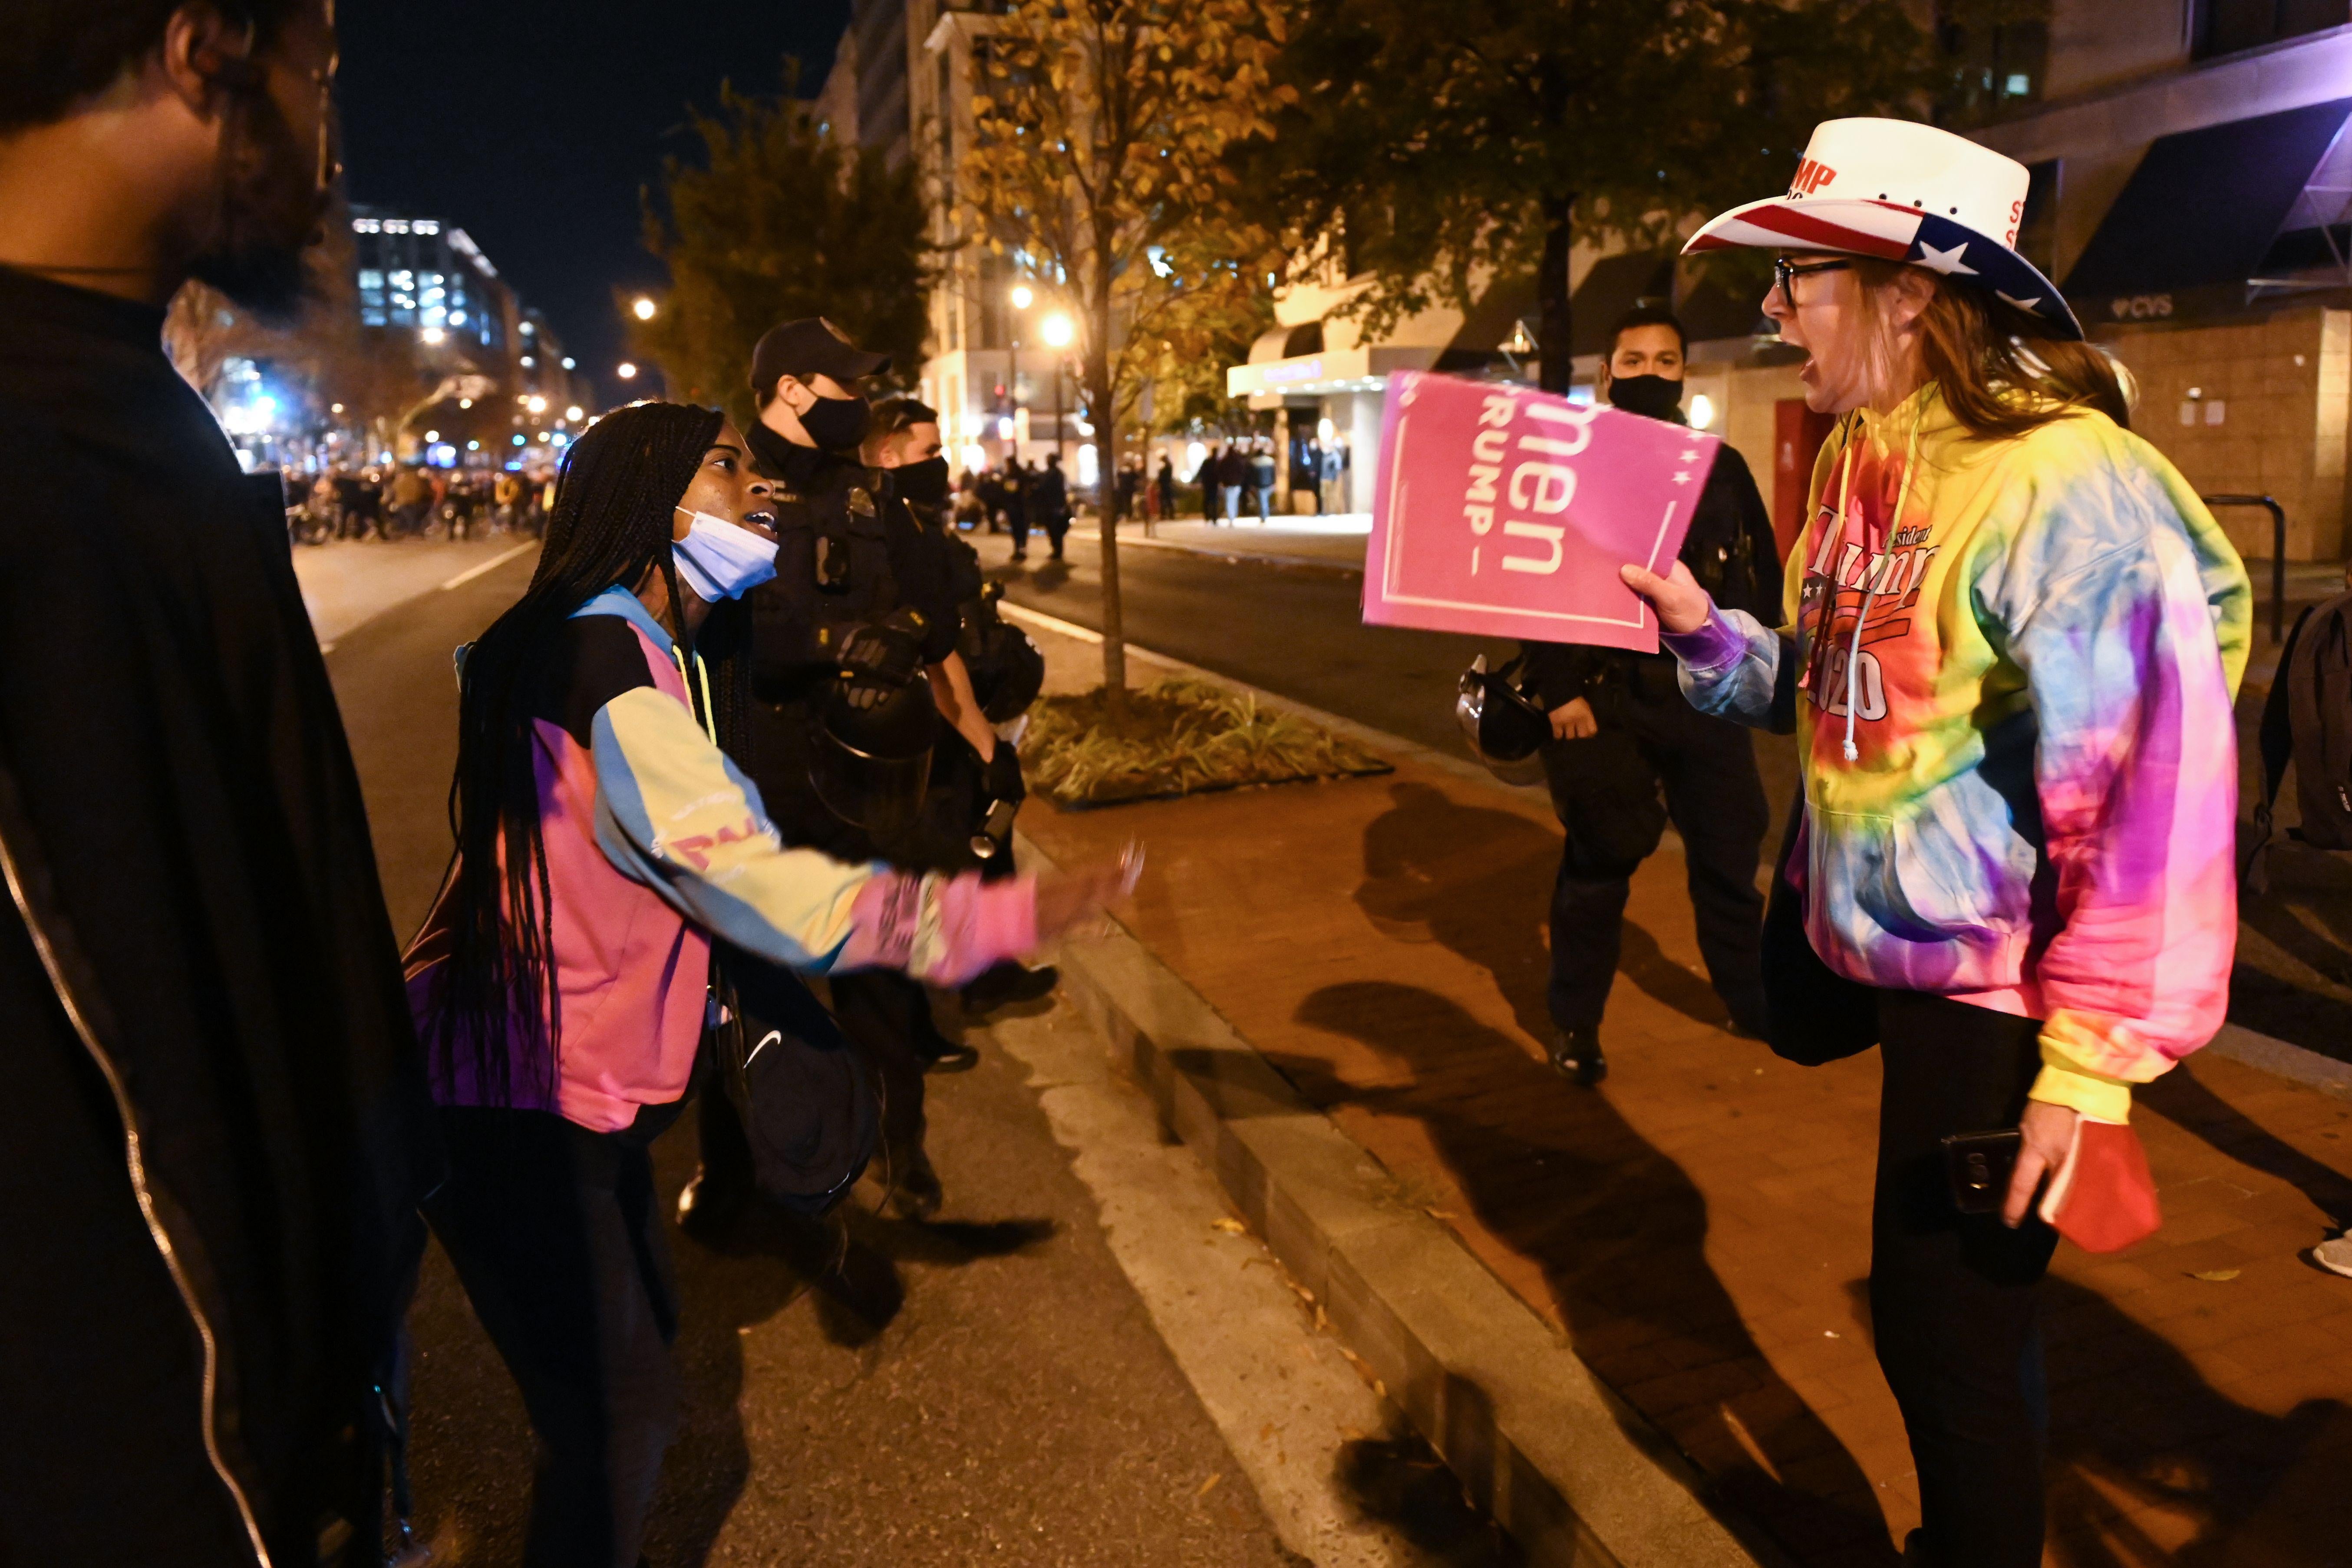 Two people shouting at each other: A Black woman with a mask pulled down to her chin and a white woman with a Women for Trump sign, in American flag cowboy hat and tyedye sweater